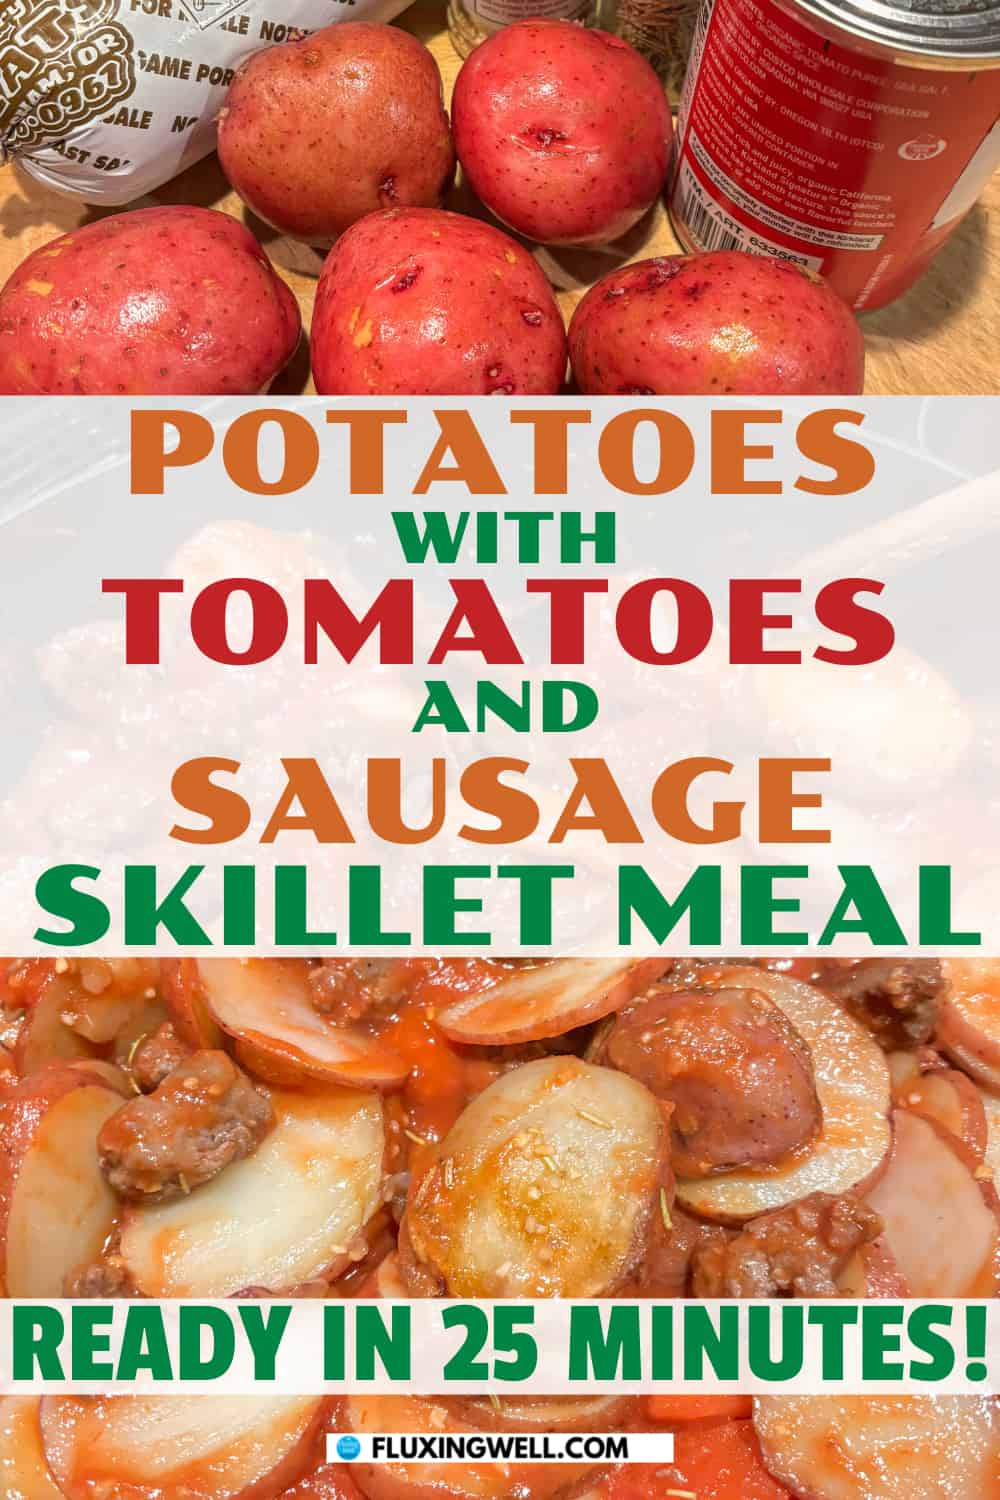 potatoes with tomatoes and sausage skillet meal ingredients and finished meal